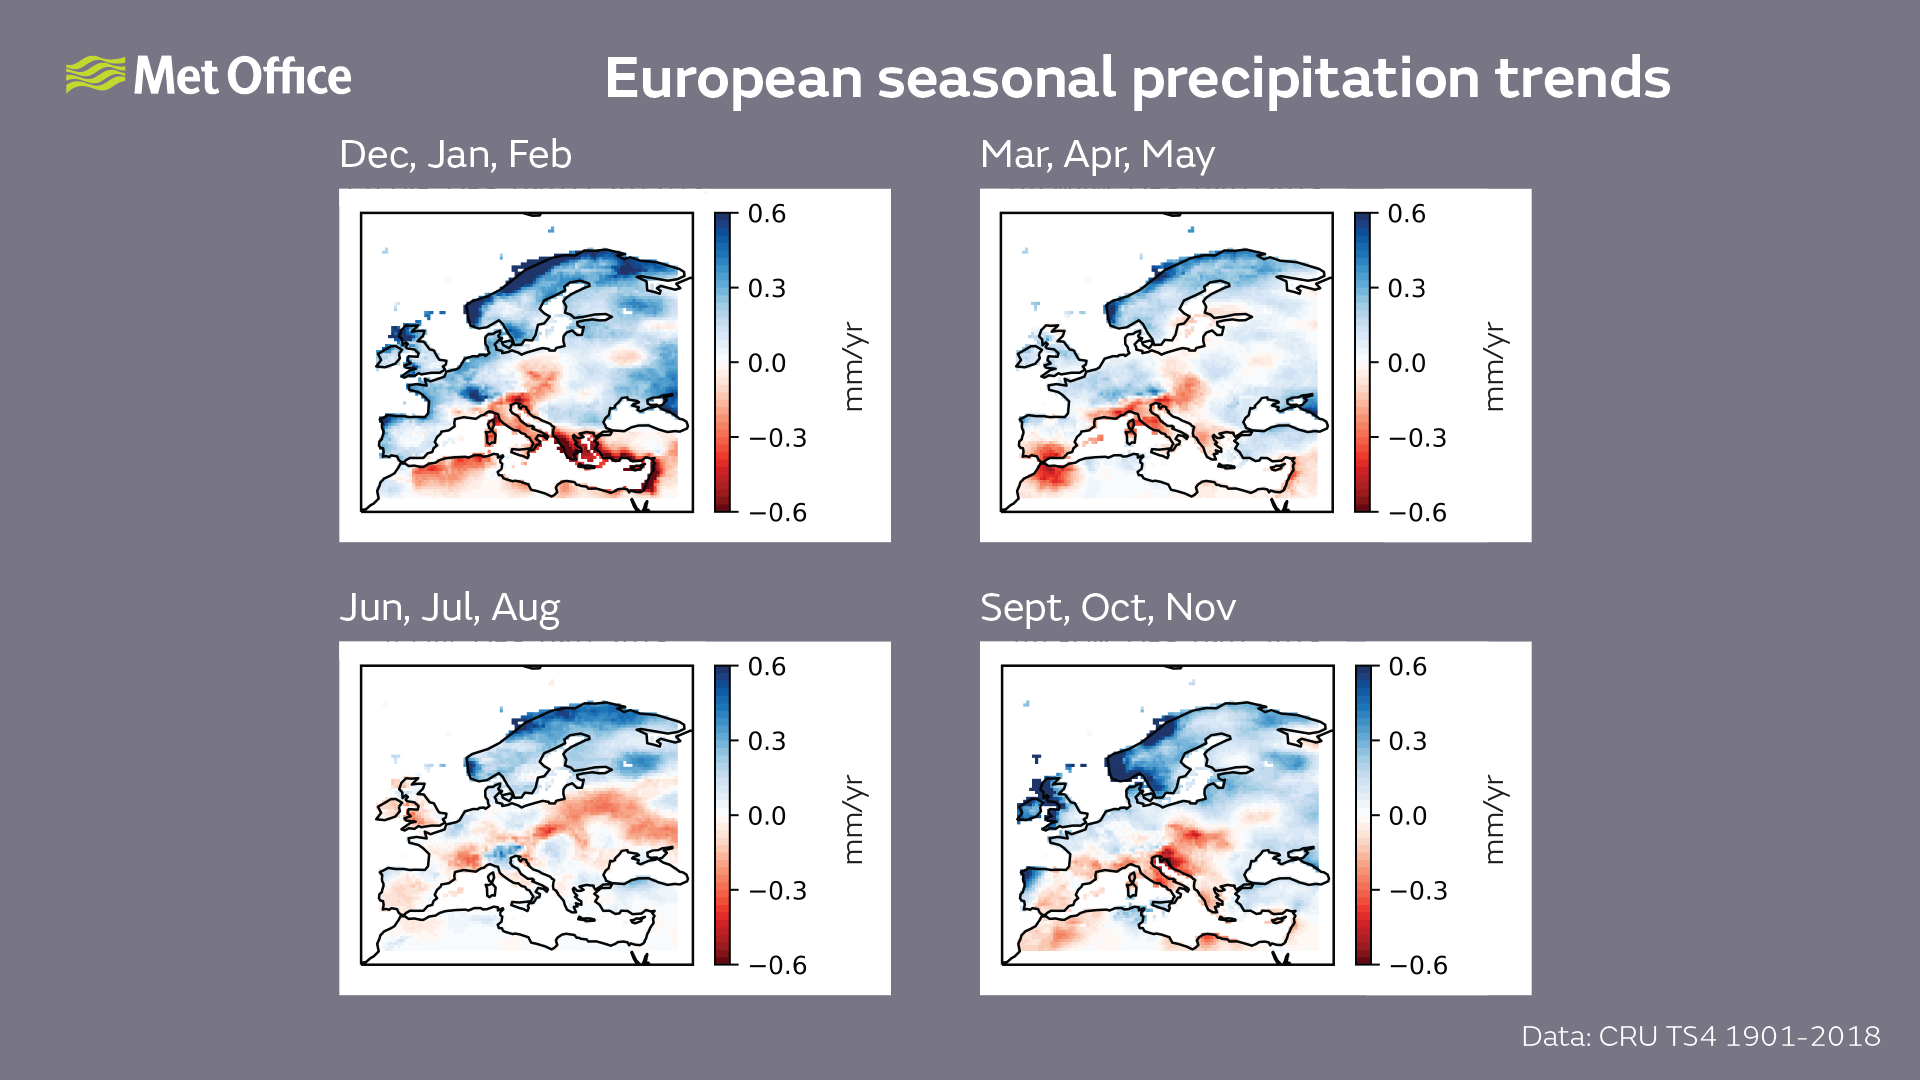 Maps showing a pattern of increasing seasonal rainfall north of the Mediterranean basin and decreases in southernmost Europe. This pattern is stronger and more widespread in winter, and weaker in summer when Eastern and Western Europe also experience dry conditions. In the maps red colours show drying and blue colours show increased rainfall between 1901 and 2018.